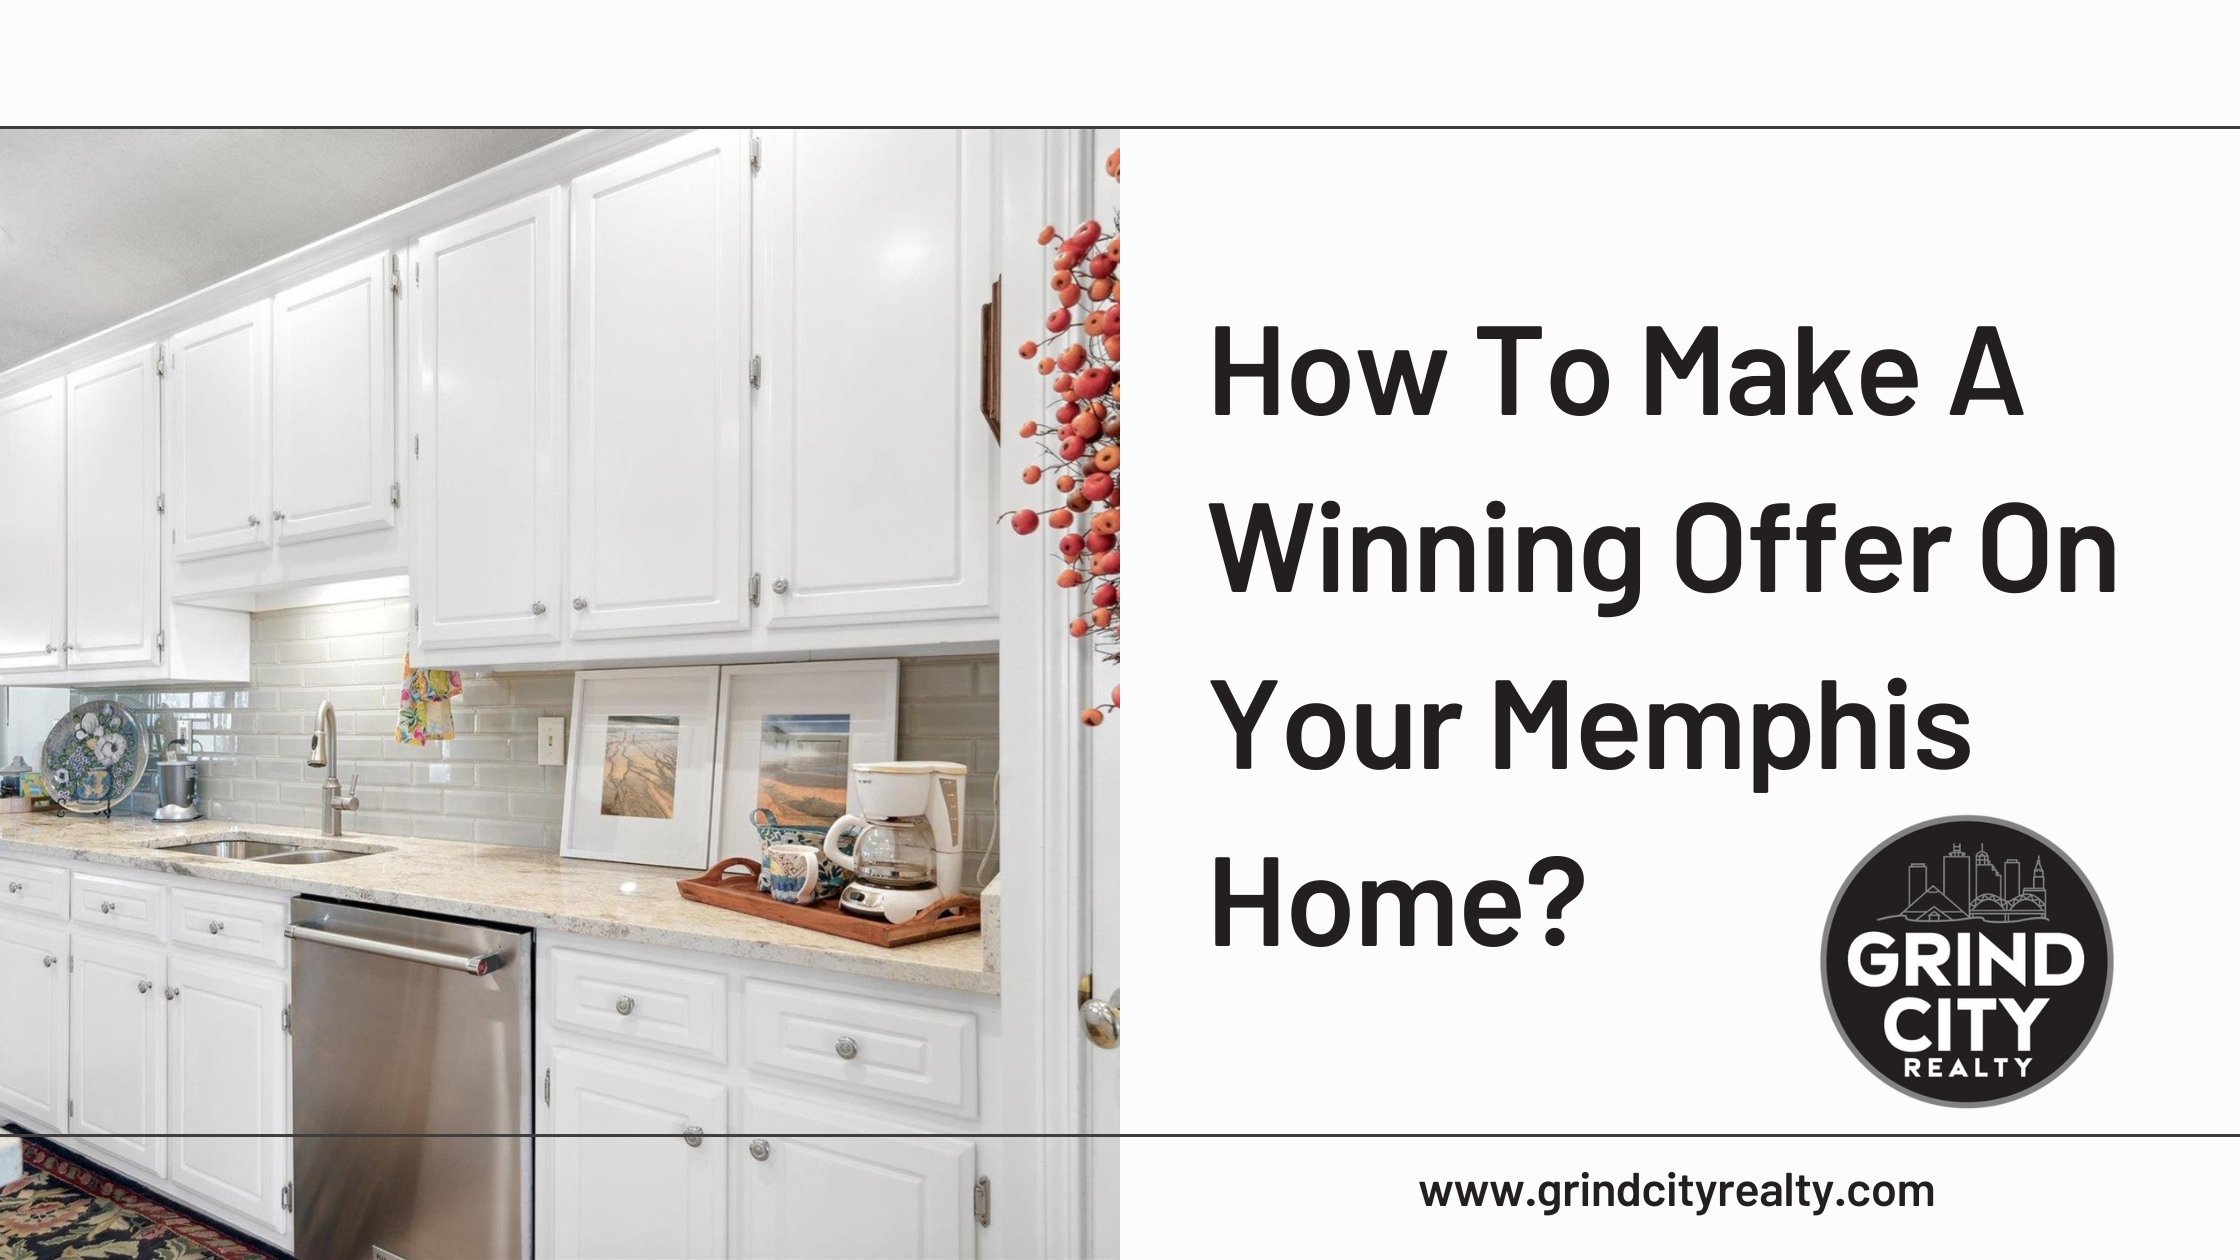 How To Make A Winning Offer On Your Memphis Home?